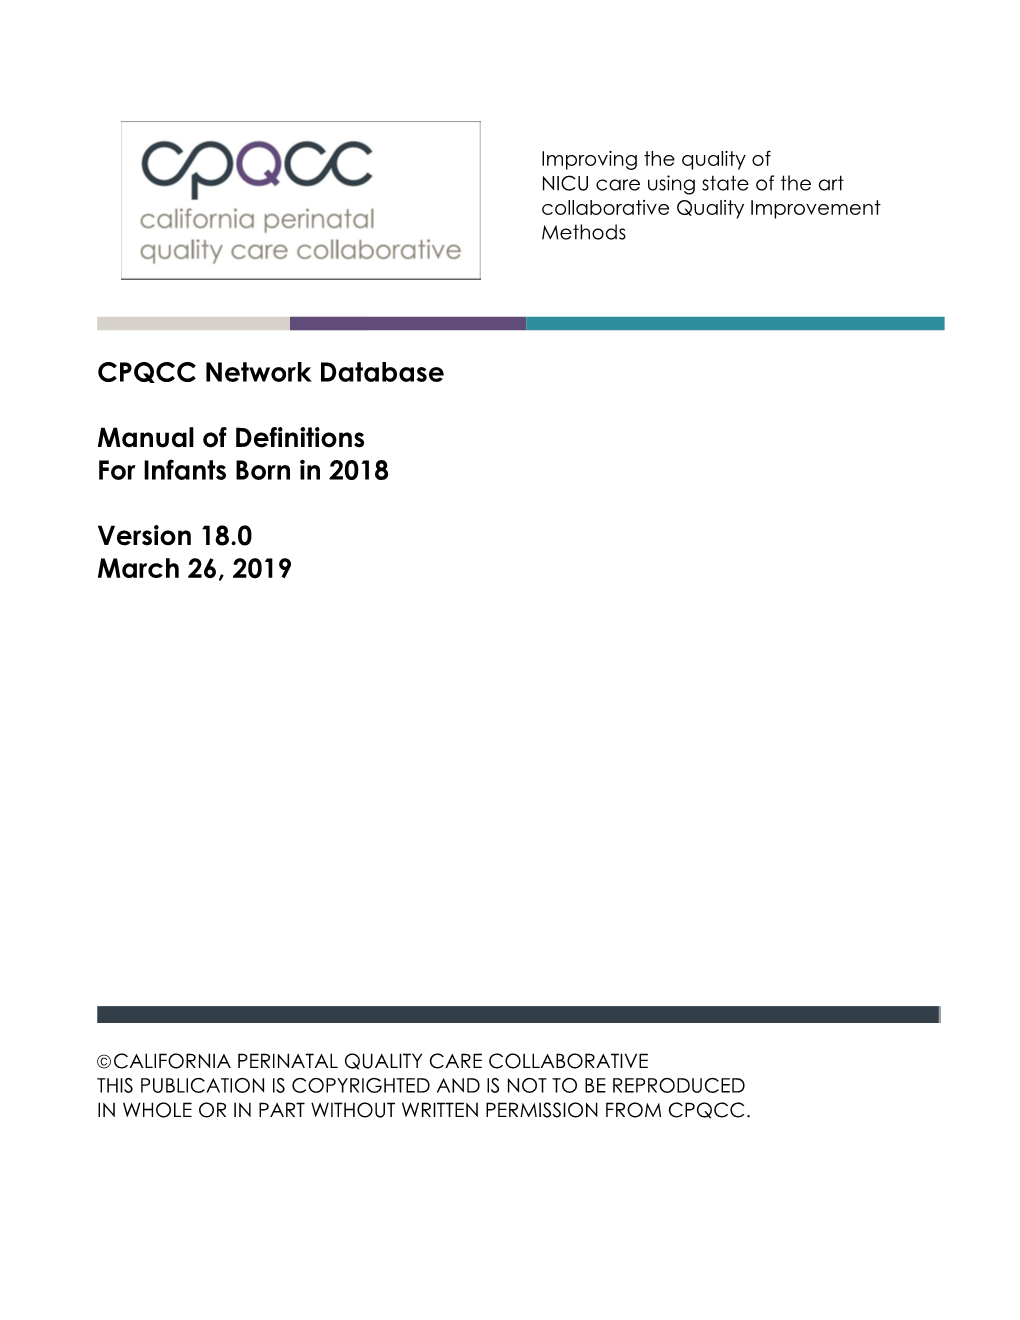 2018 CPQCC Manual of Definitions 3.26.19